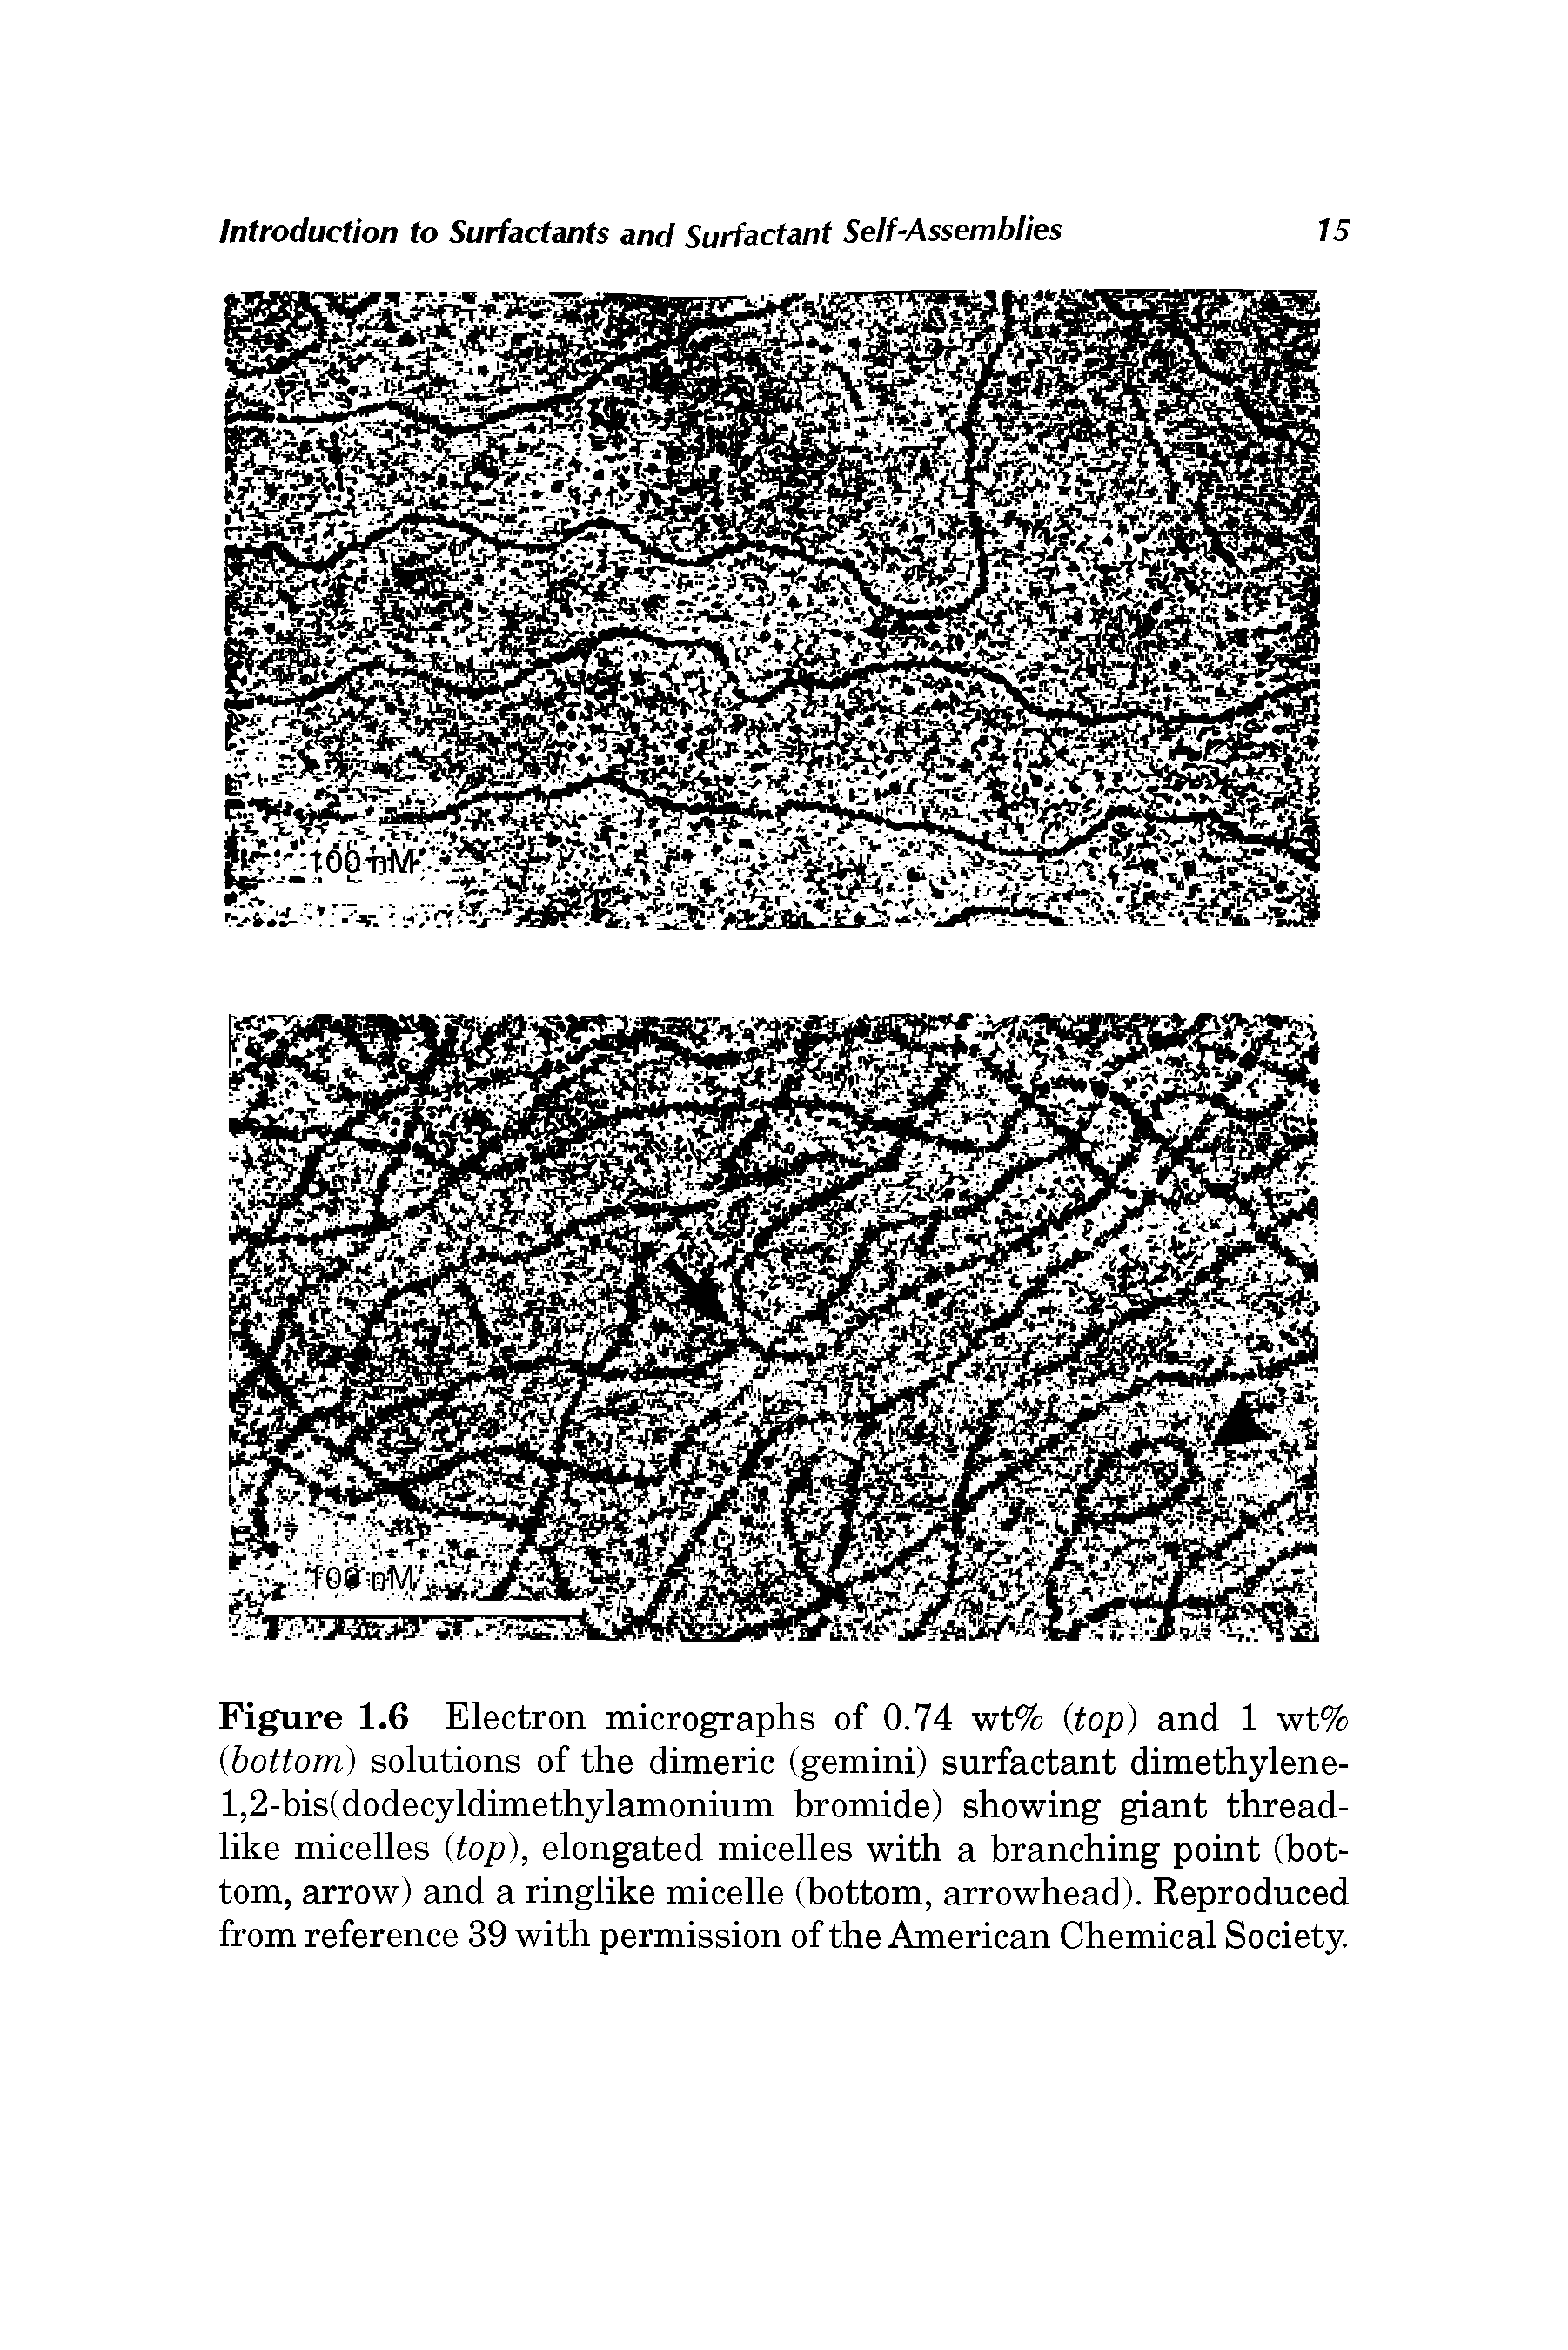 Figure 1.6 Electron micrographs of 0.74 wt% (top) and 1 wt% (bottom) solutions of the dimeric (gemini) surfactant dimethylene-1,2-bis(dodecyldimethylamonium bromide) showing giant threadlike micelles (top), elongated micelles with a branching point (bottom, arrow) and a ringlike micelle (bottom, arrowhead). Reproduced from reference 39 with permission of the American Chemical Society.